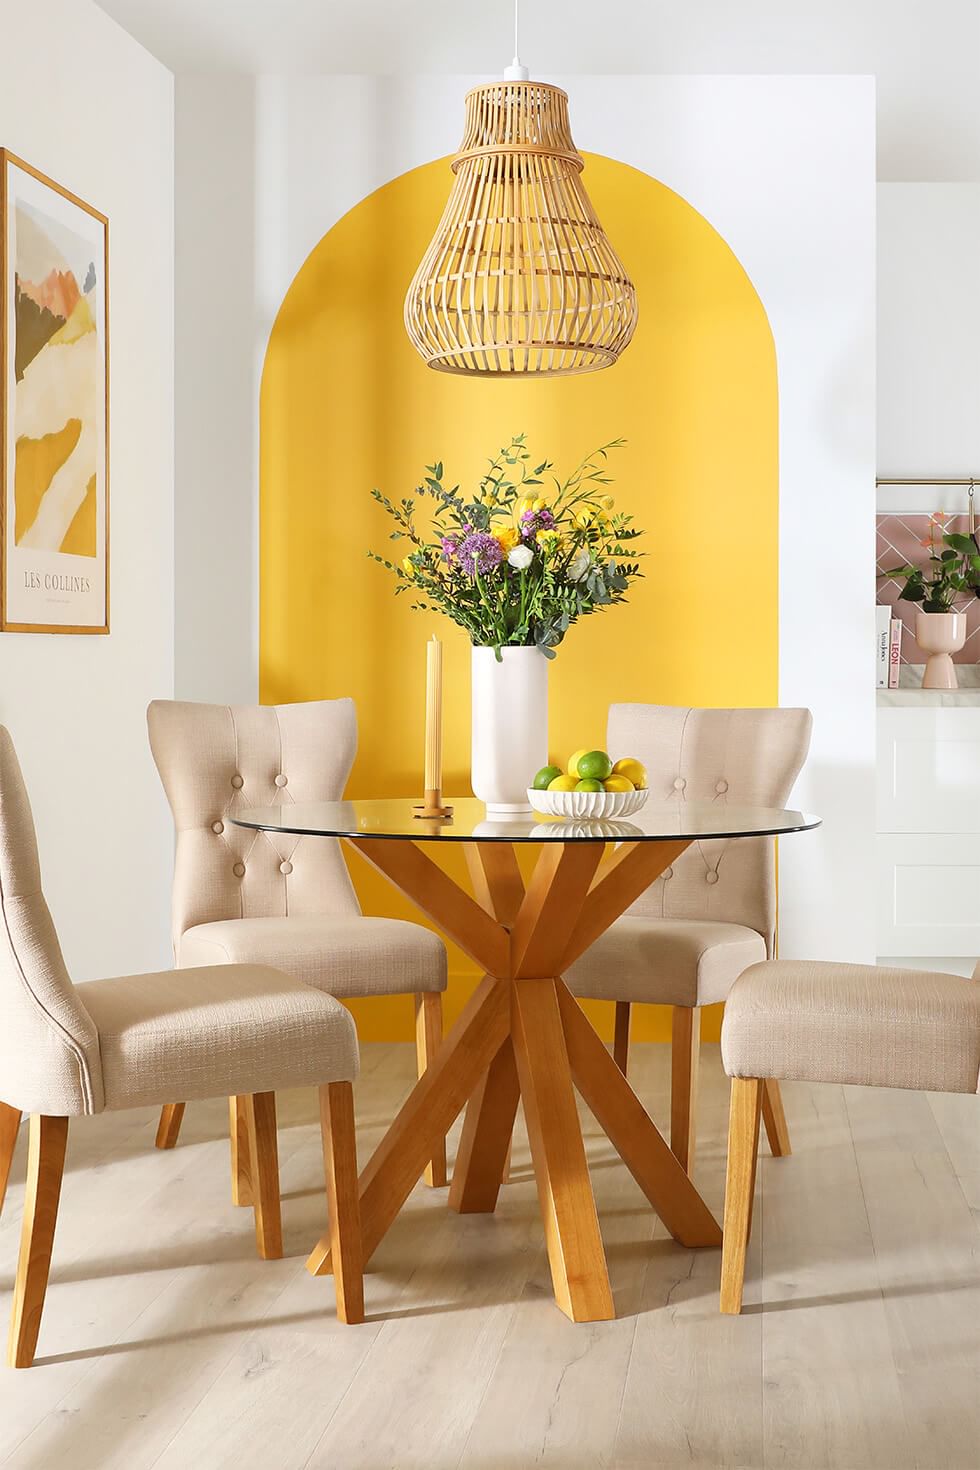 sunshine yellow patterned walls in a modern dining room